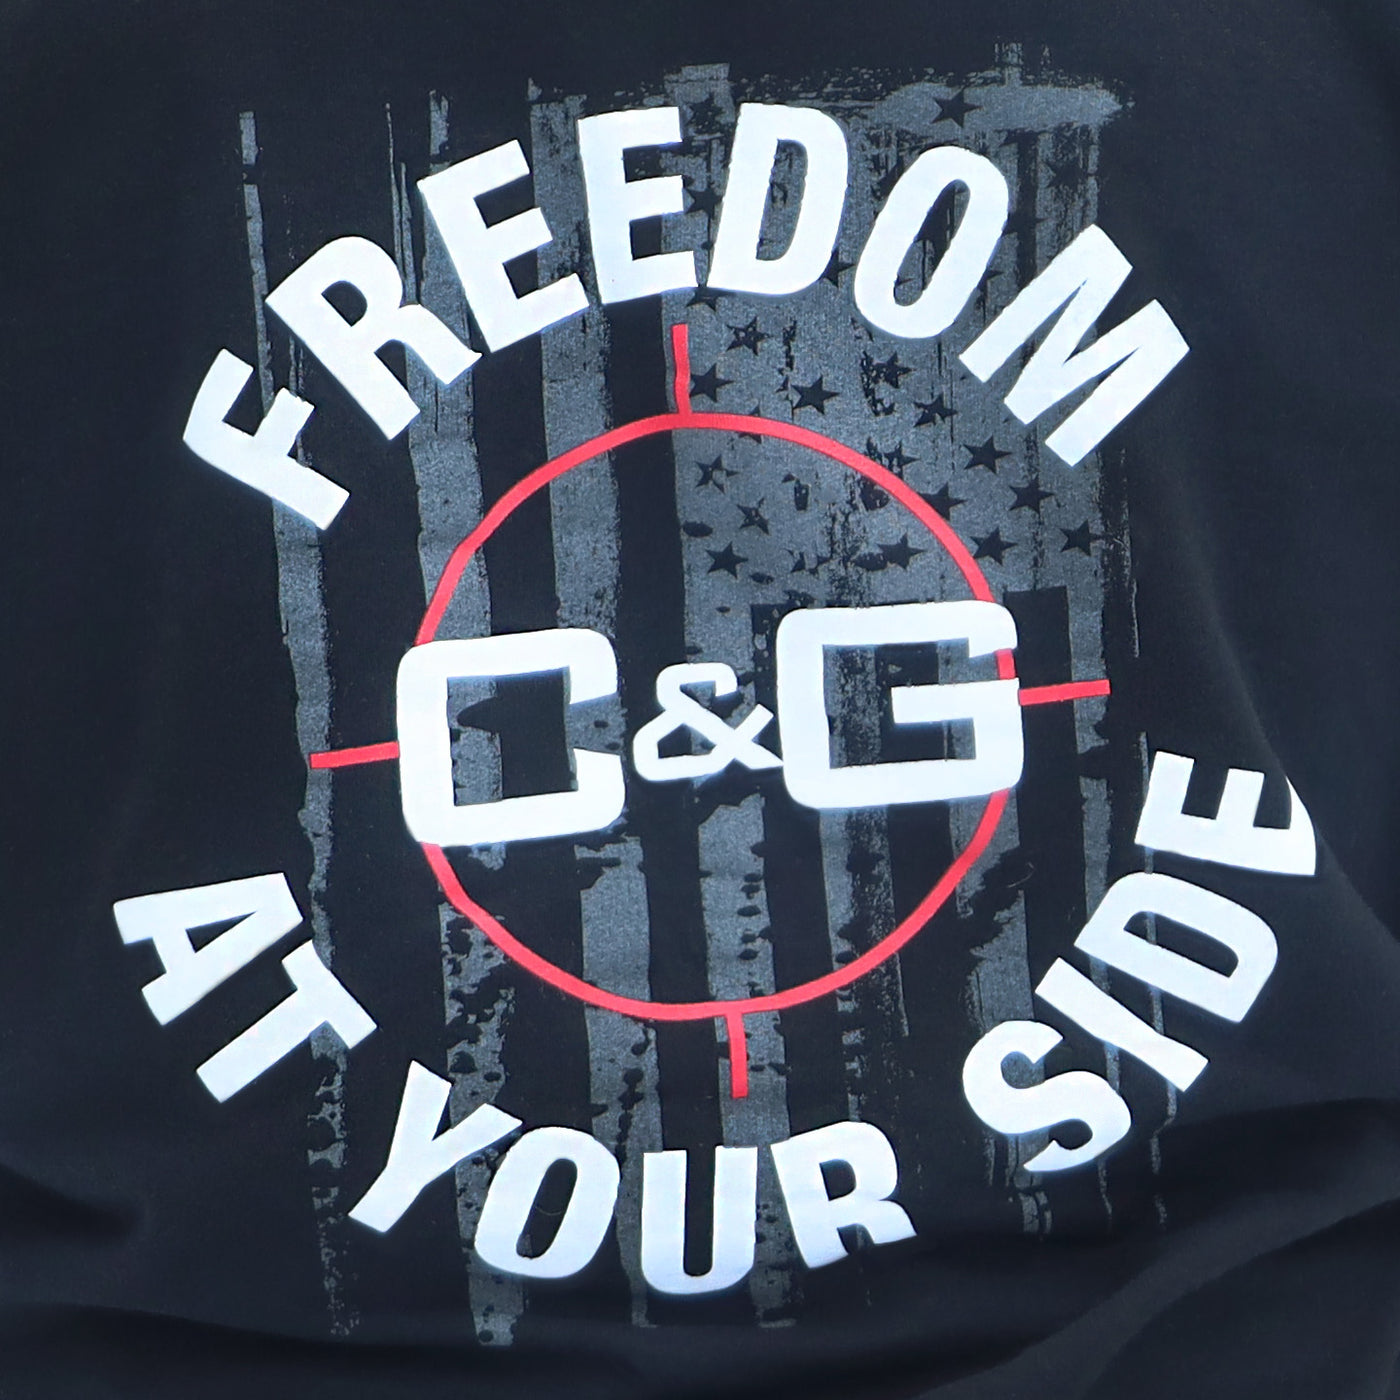 C&G Holsters FREEDOM AT YOUR SIDE Hoodie